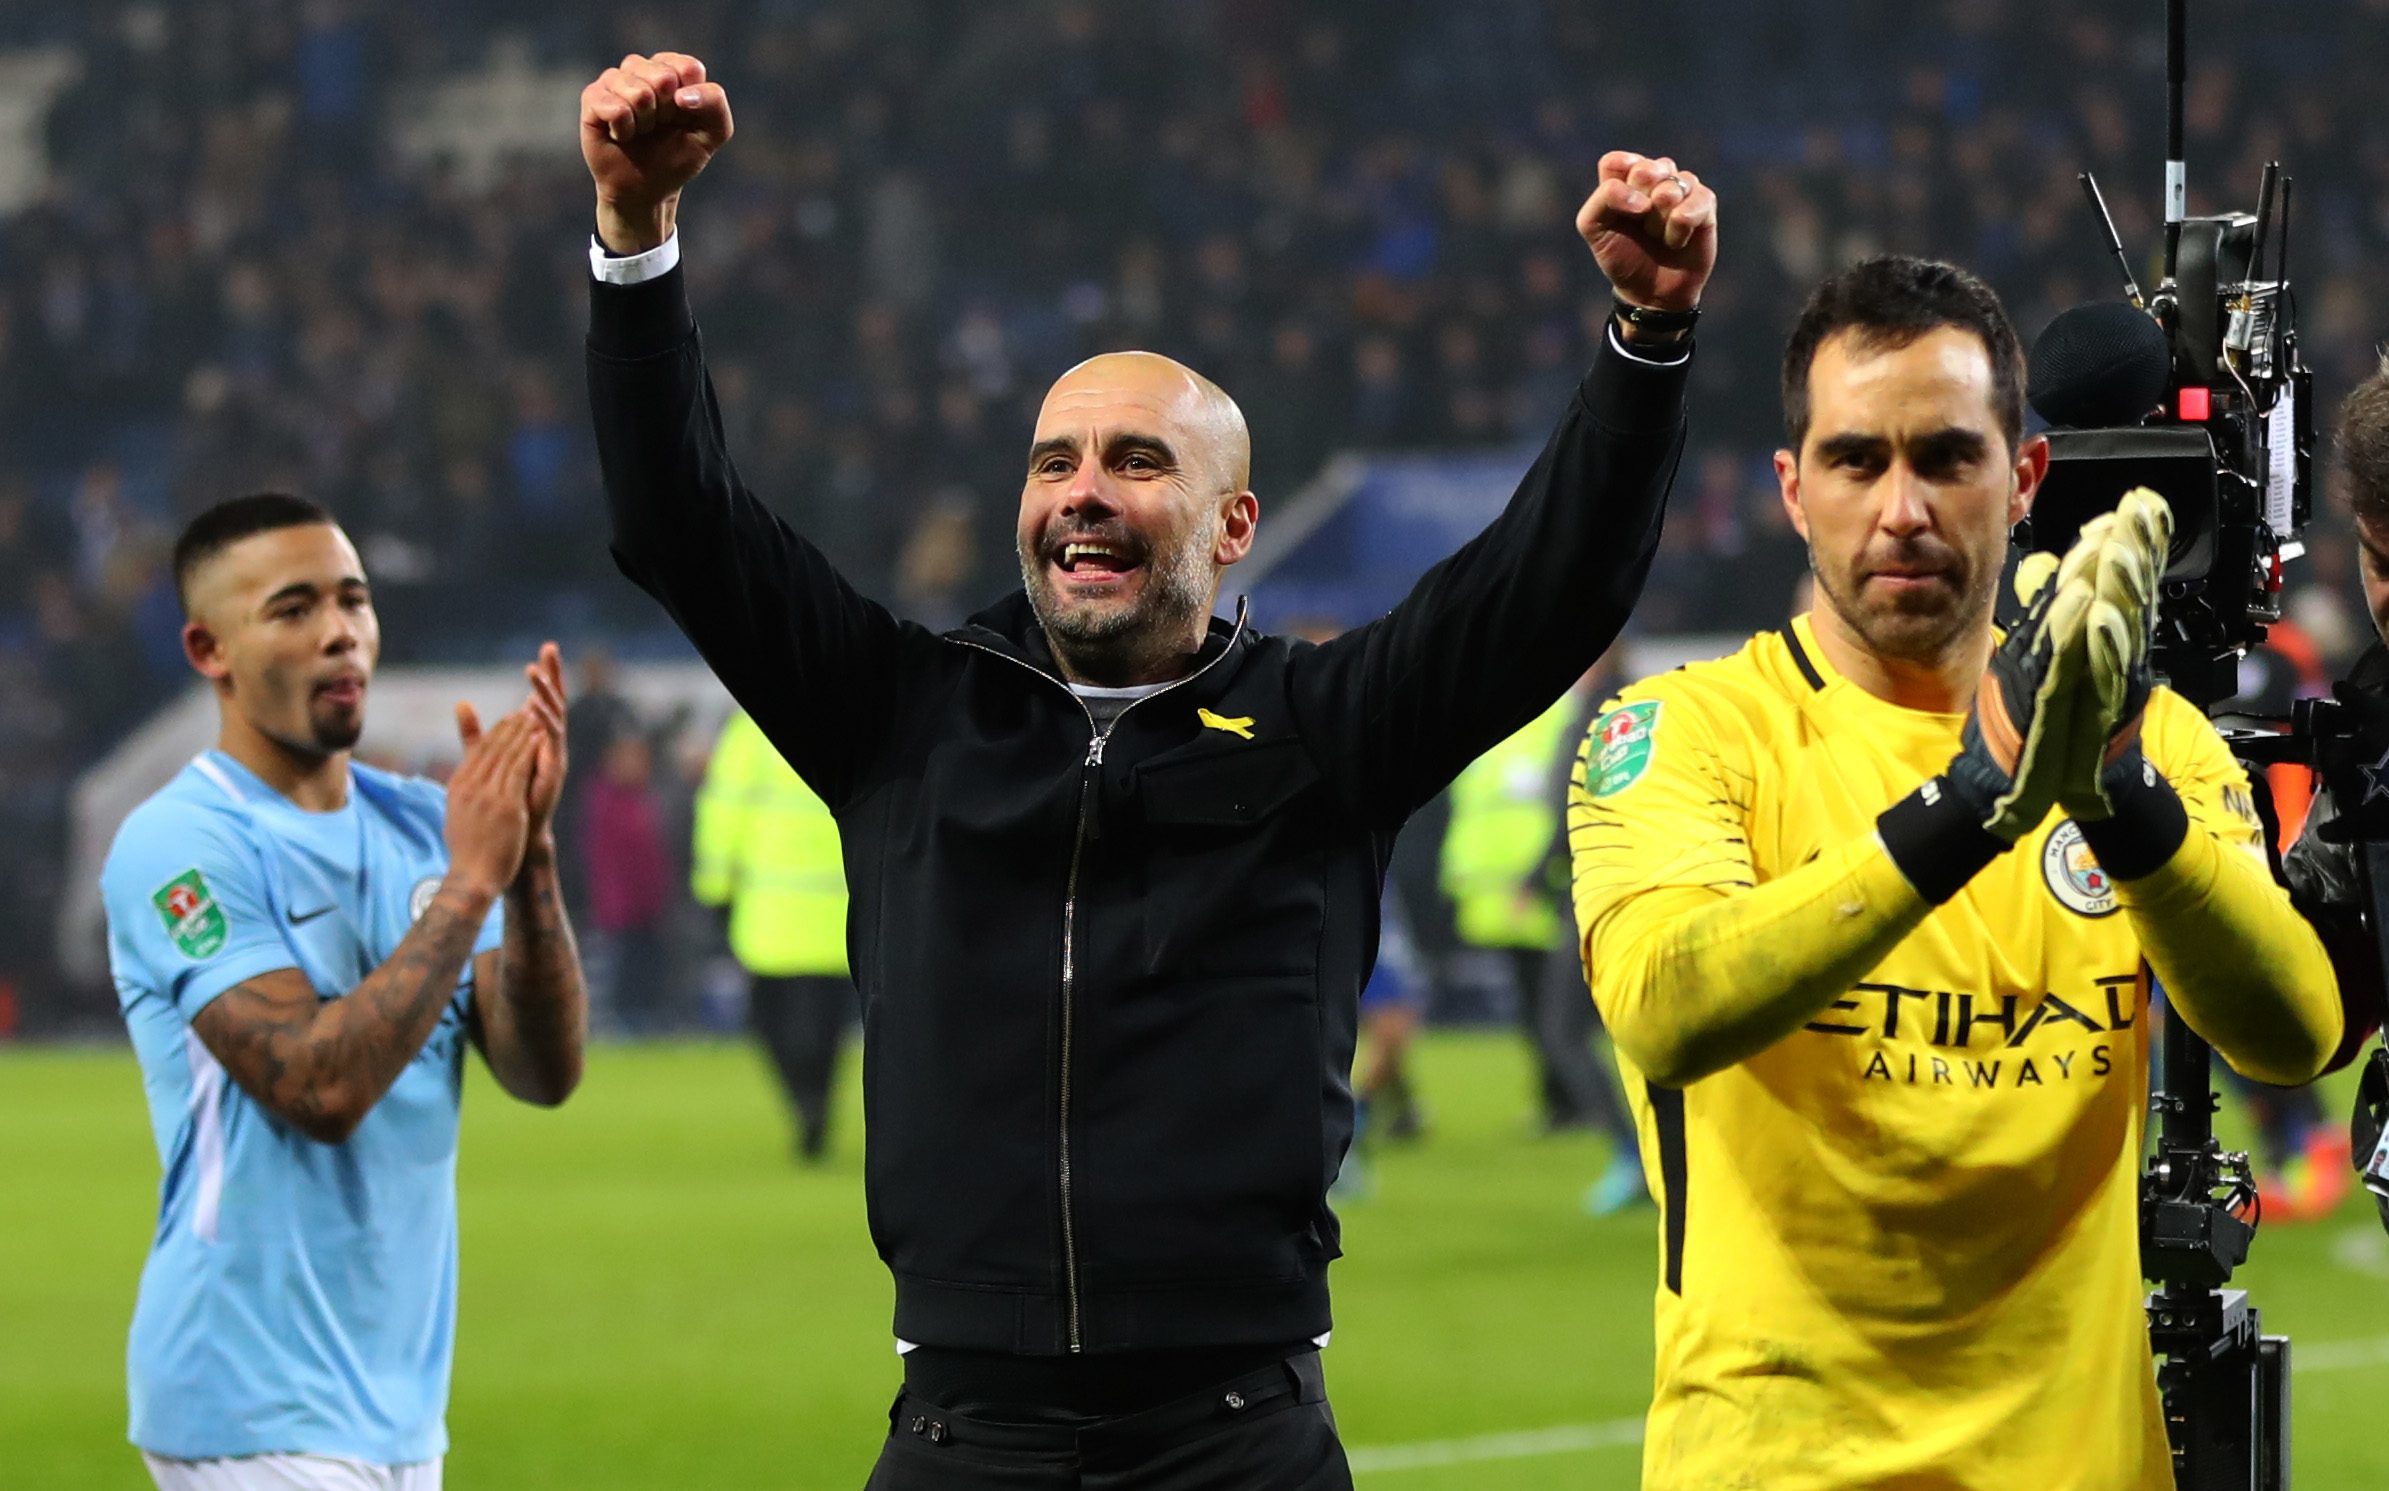 Pep Guardiola celebrates winning in the cup against Leicester on penalties (Catherine Ivill/Getty Images)